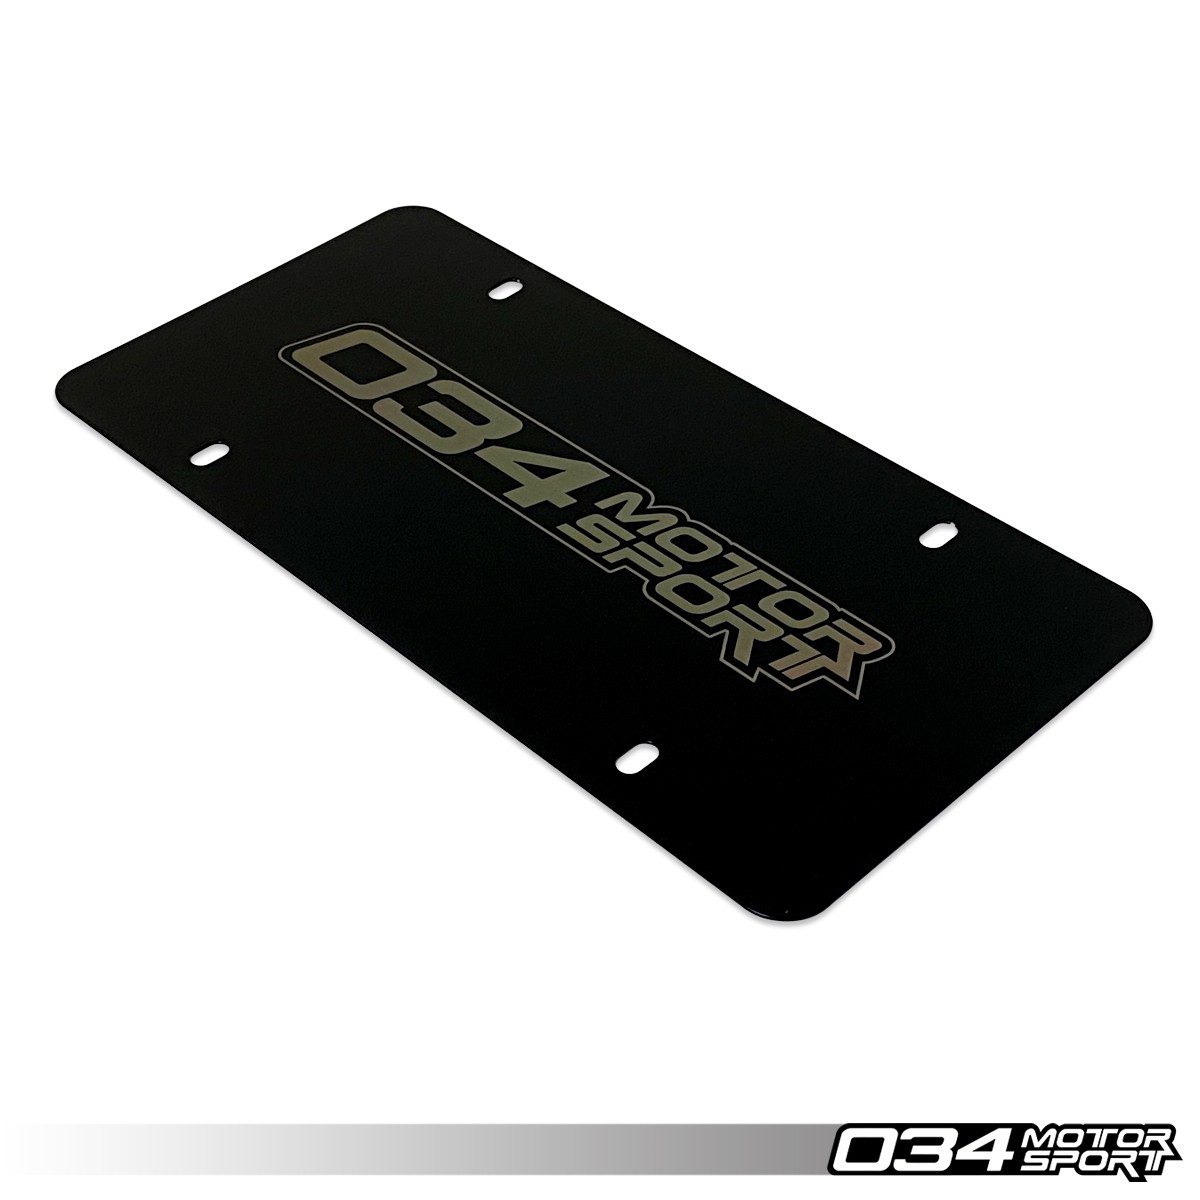 034Motorsport License Plate, Powdercoated Stainless Steel 034-A03-0002